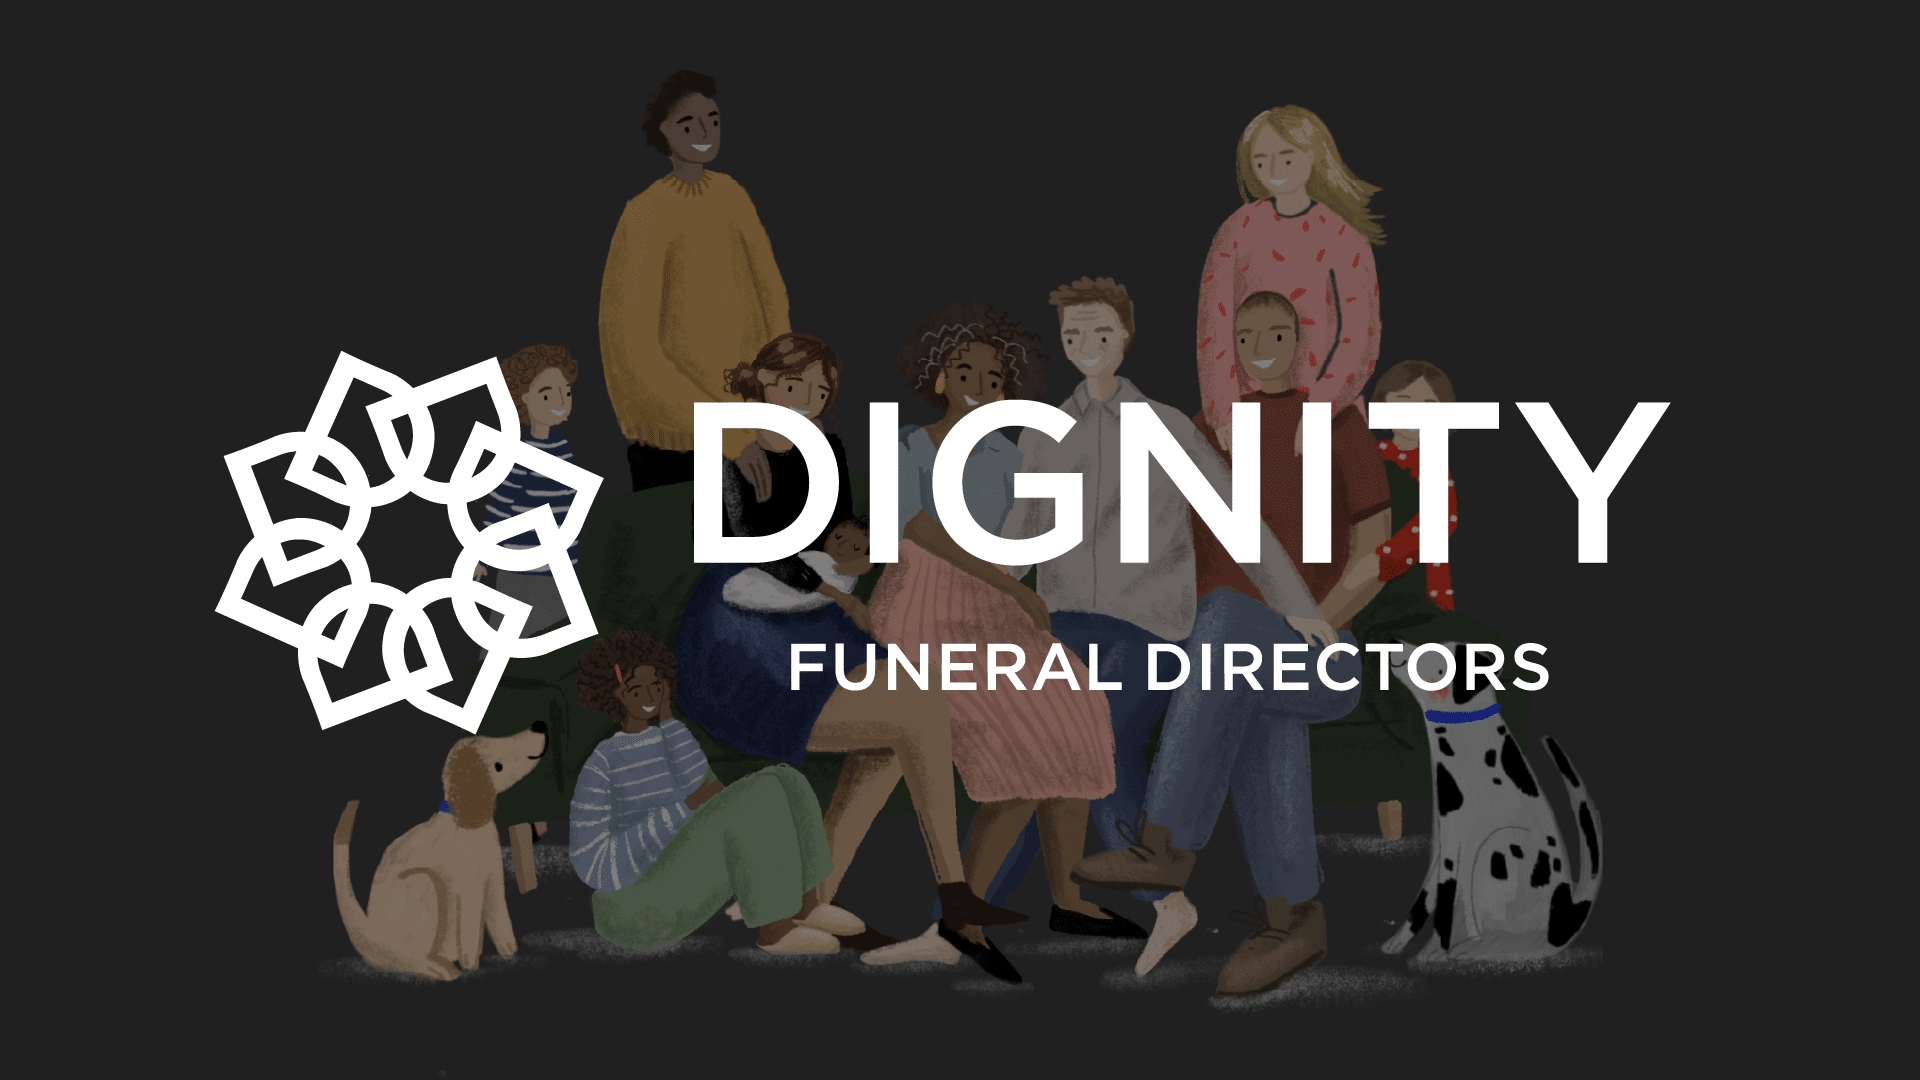 Header image for Dignity case study, showing a bunch of cartoon-style characters, Dignity's logo, and the words Dignity Funeral Directors on top of it all